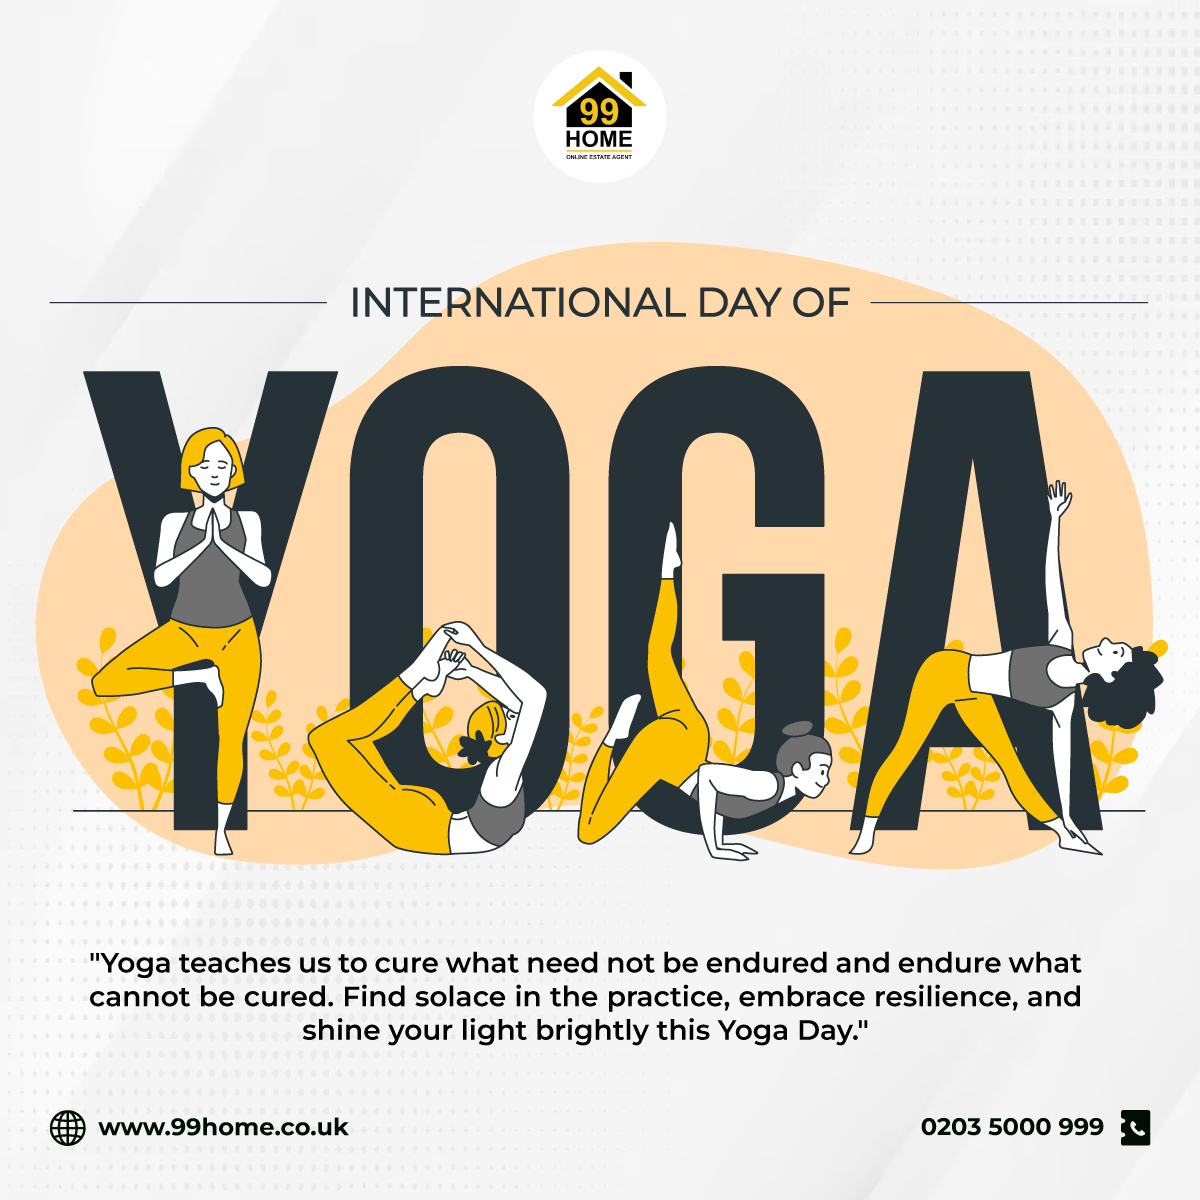 On this International Yoga Day, We wish you all a peaceful and mindful practice. Let us take a moment to connect with our breath, our bodies, and our souls. Happy International Yoga Day!

#SellProperty #SellHouse #SellHome #99home #WorldYogaDay #YogaDay #YogaForHealth